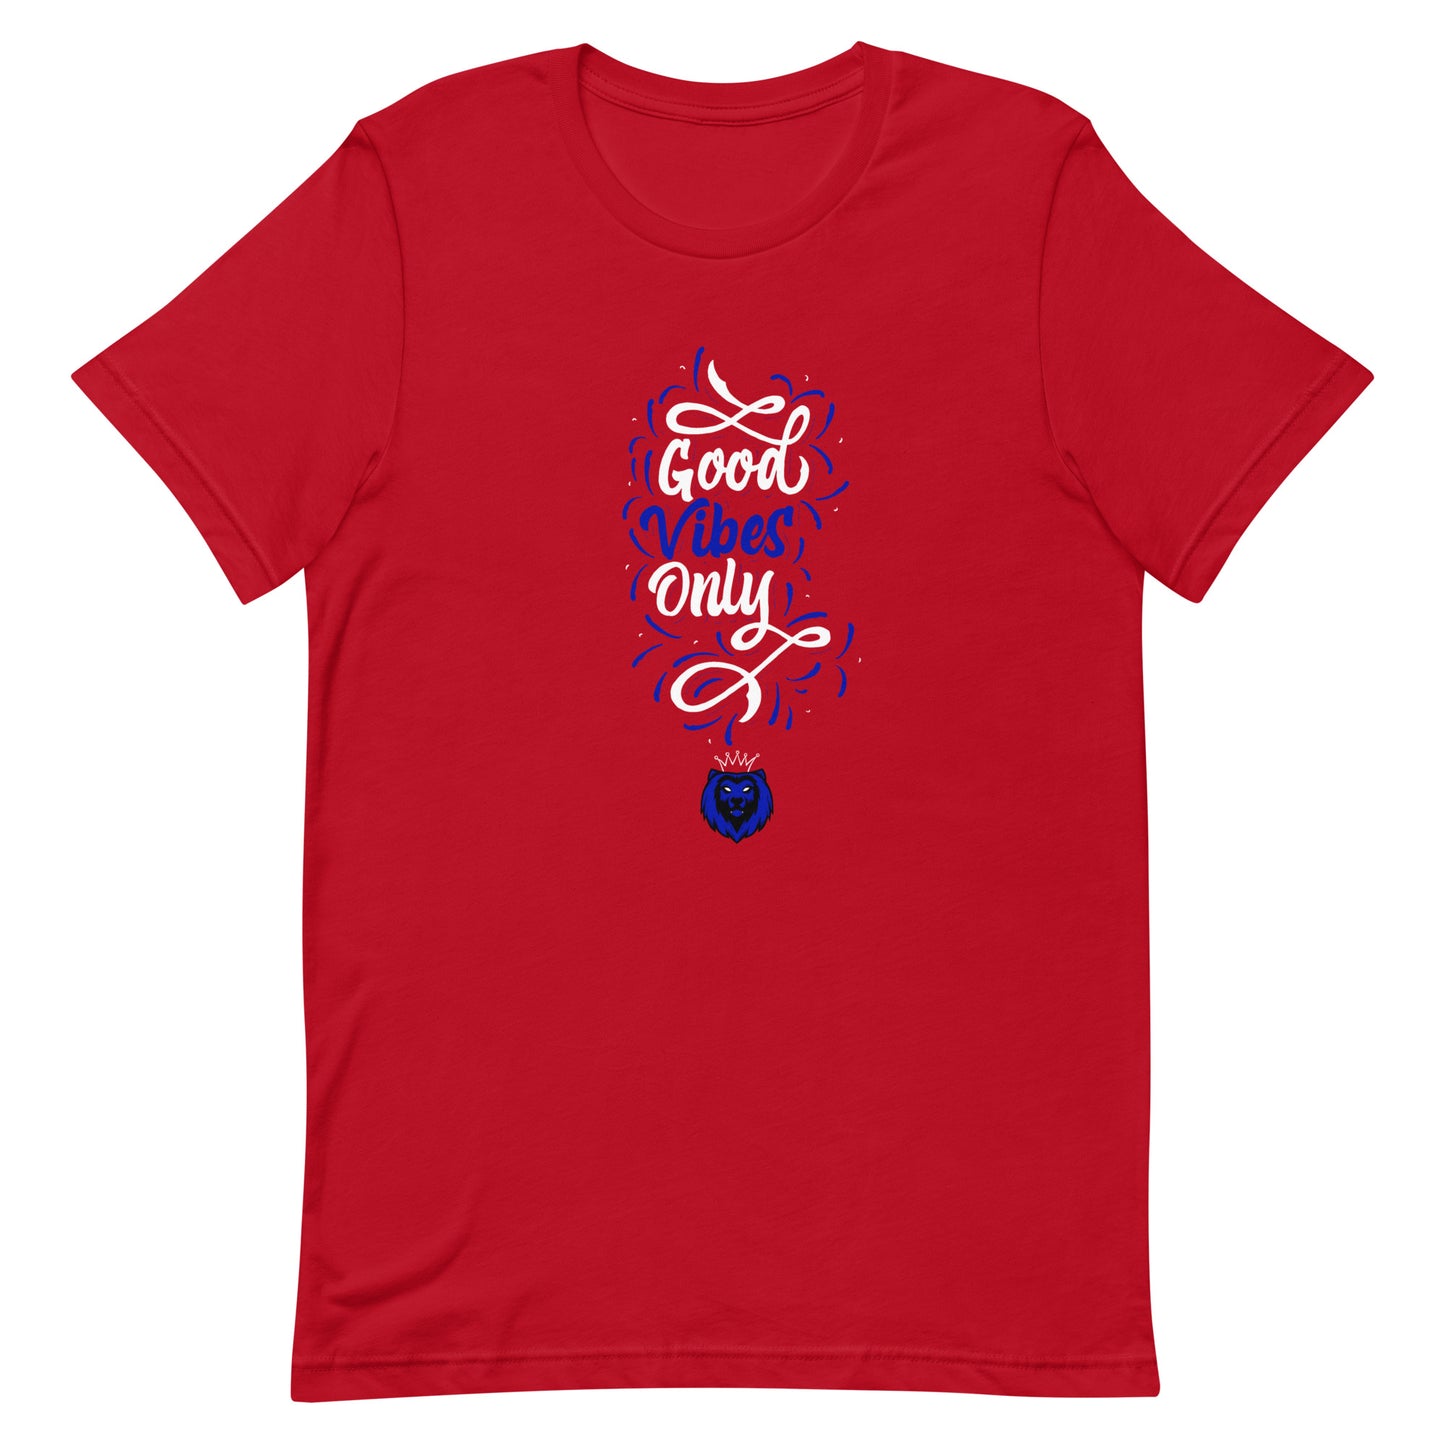 Good Vibes Only t-shirt